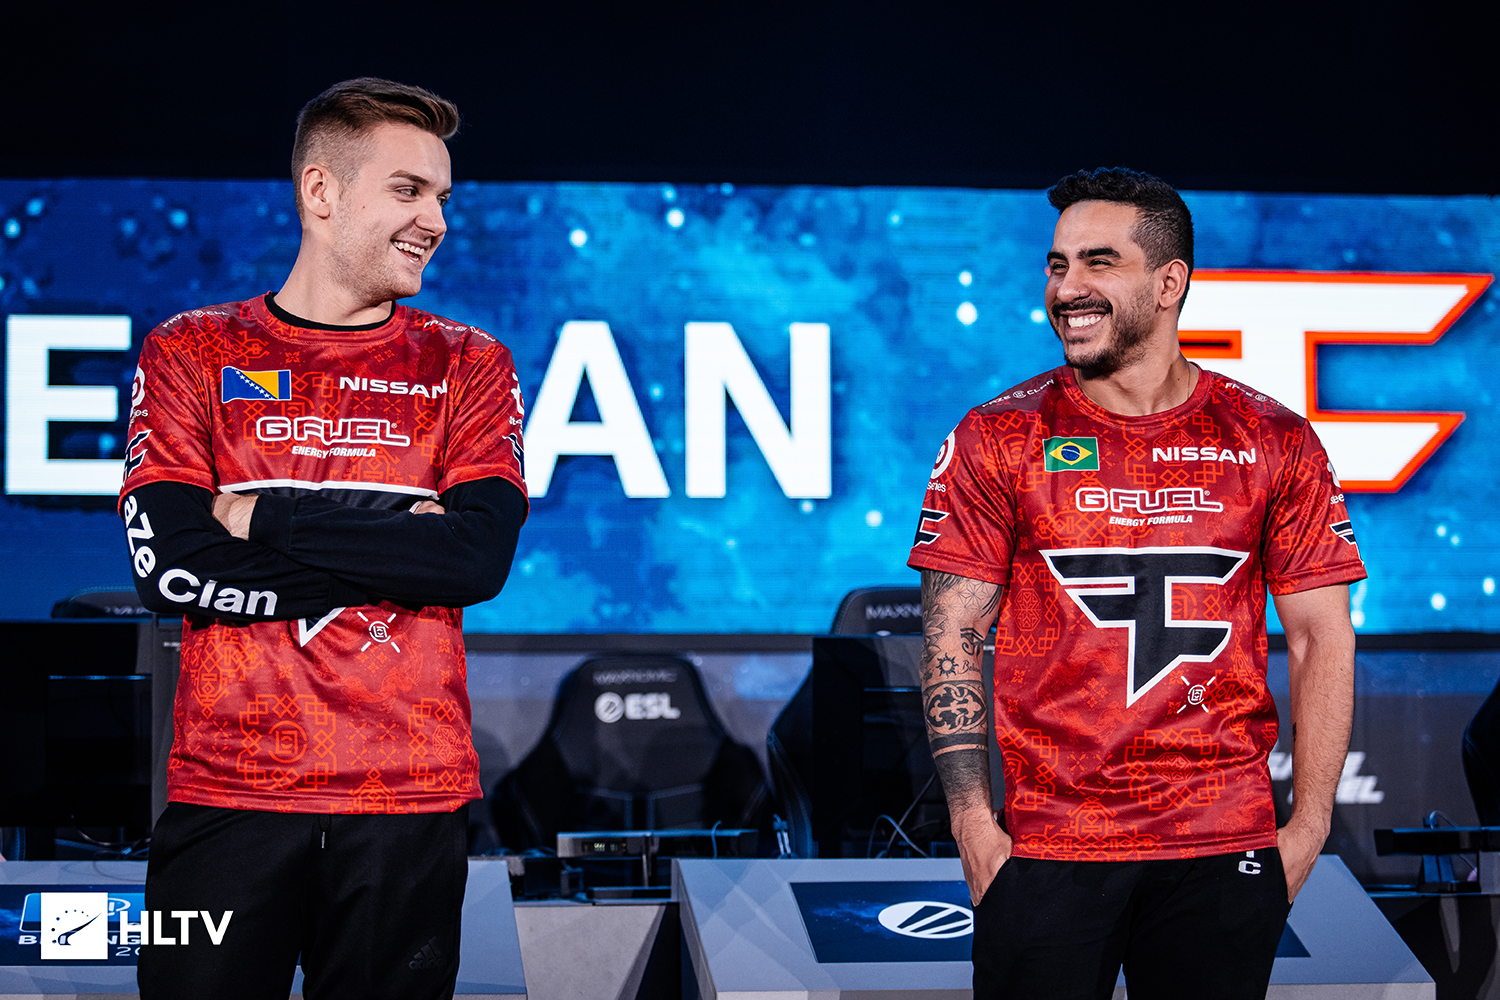 Though not the ideal ending, FaZe Clan seems to have found their groove in Beijing (Photo via HLTV)